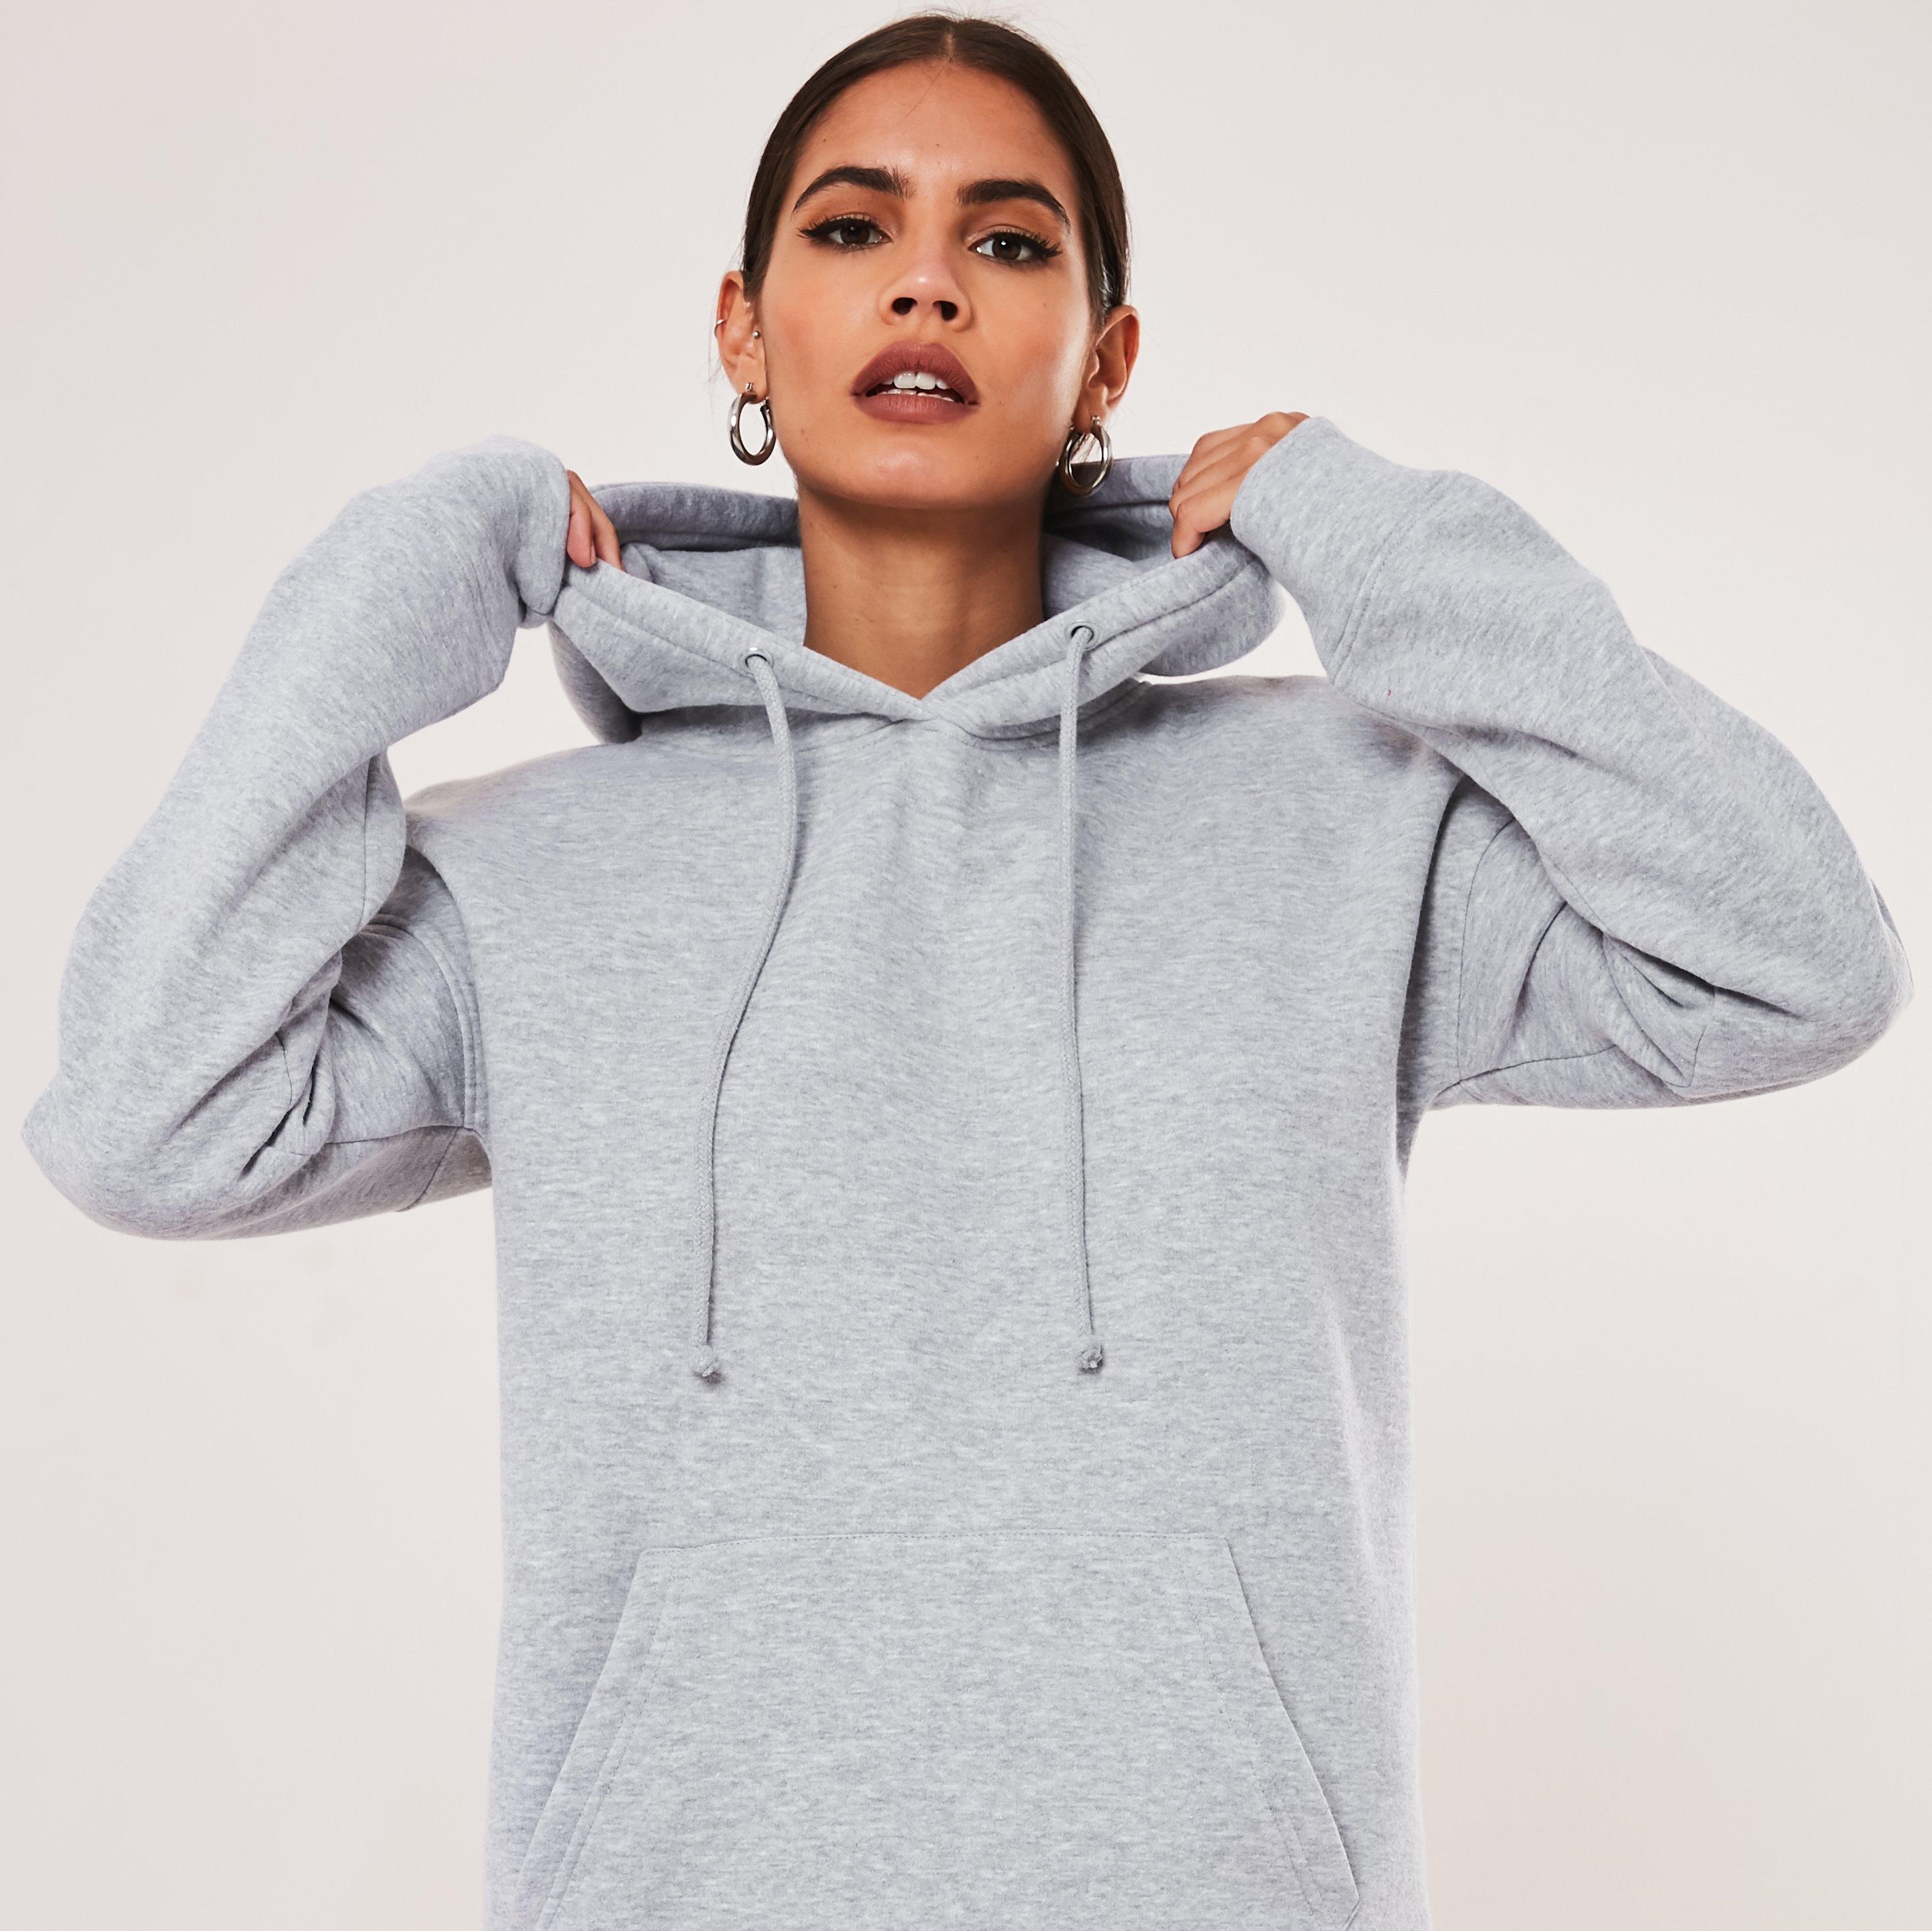 The Fashionista’s Guide to Athleisure